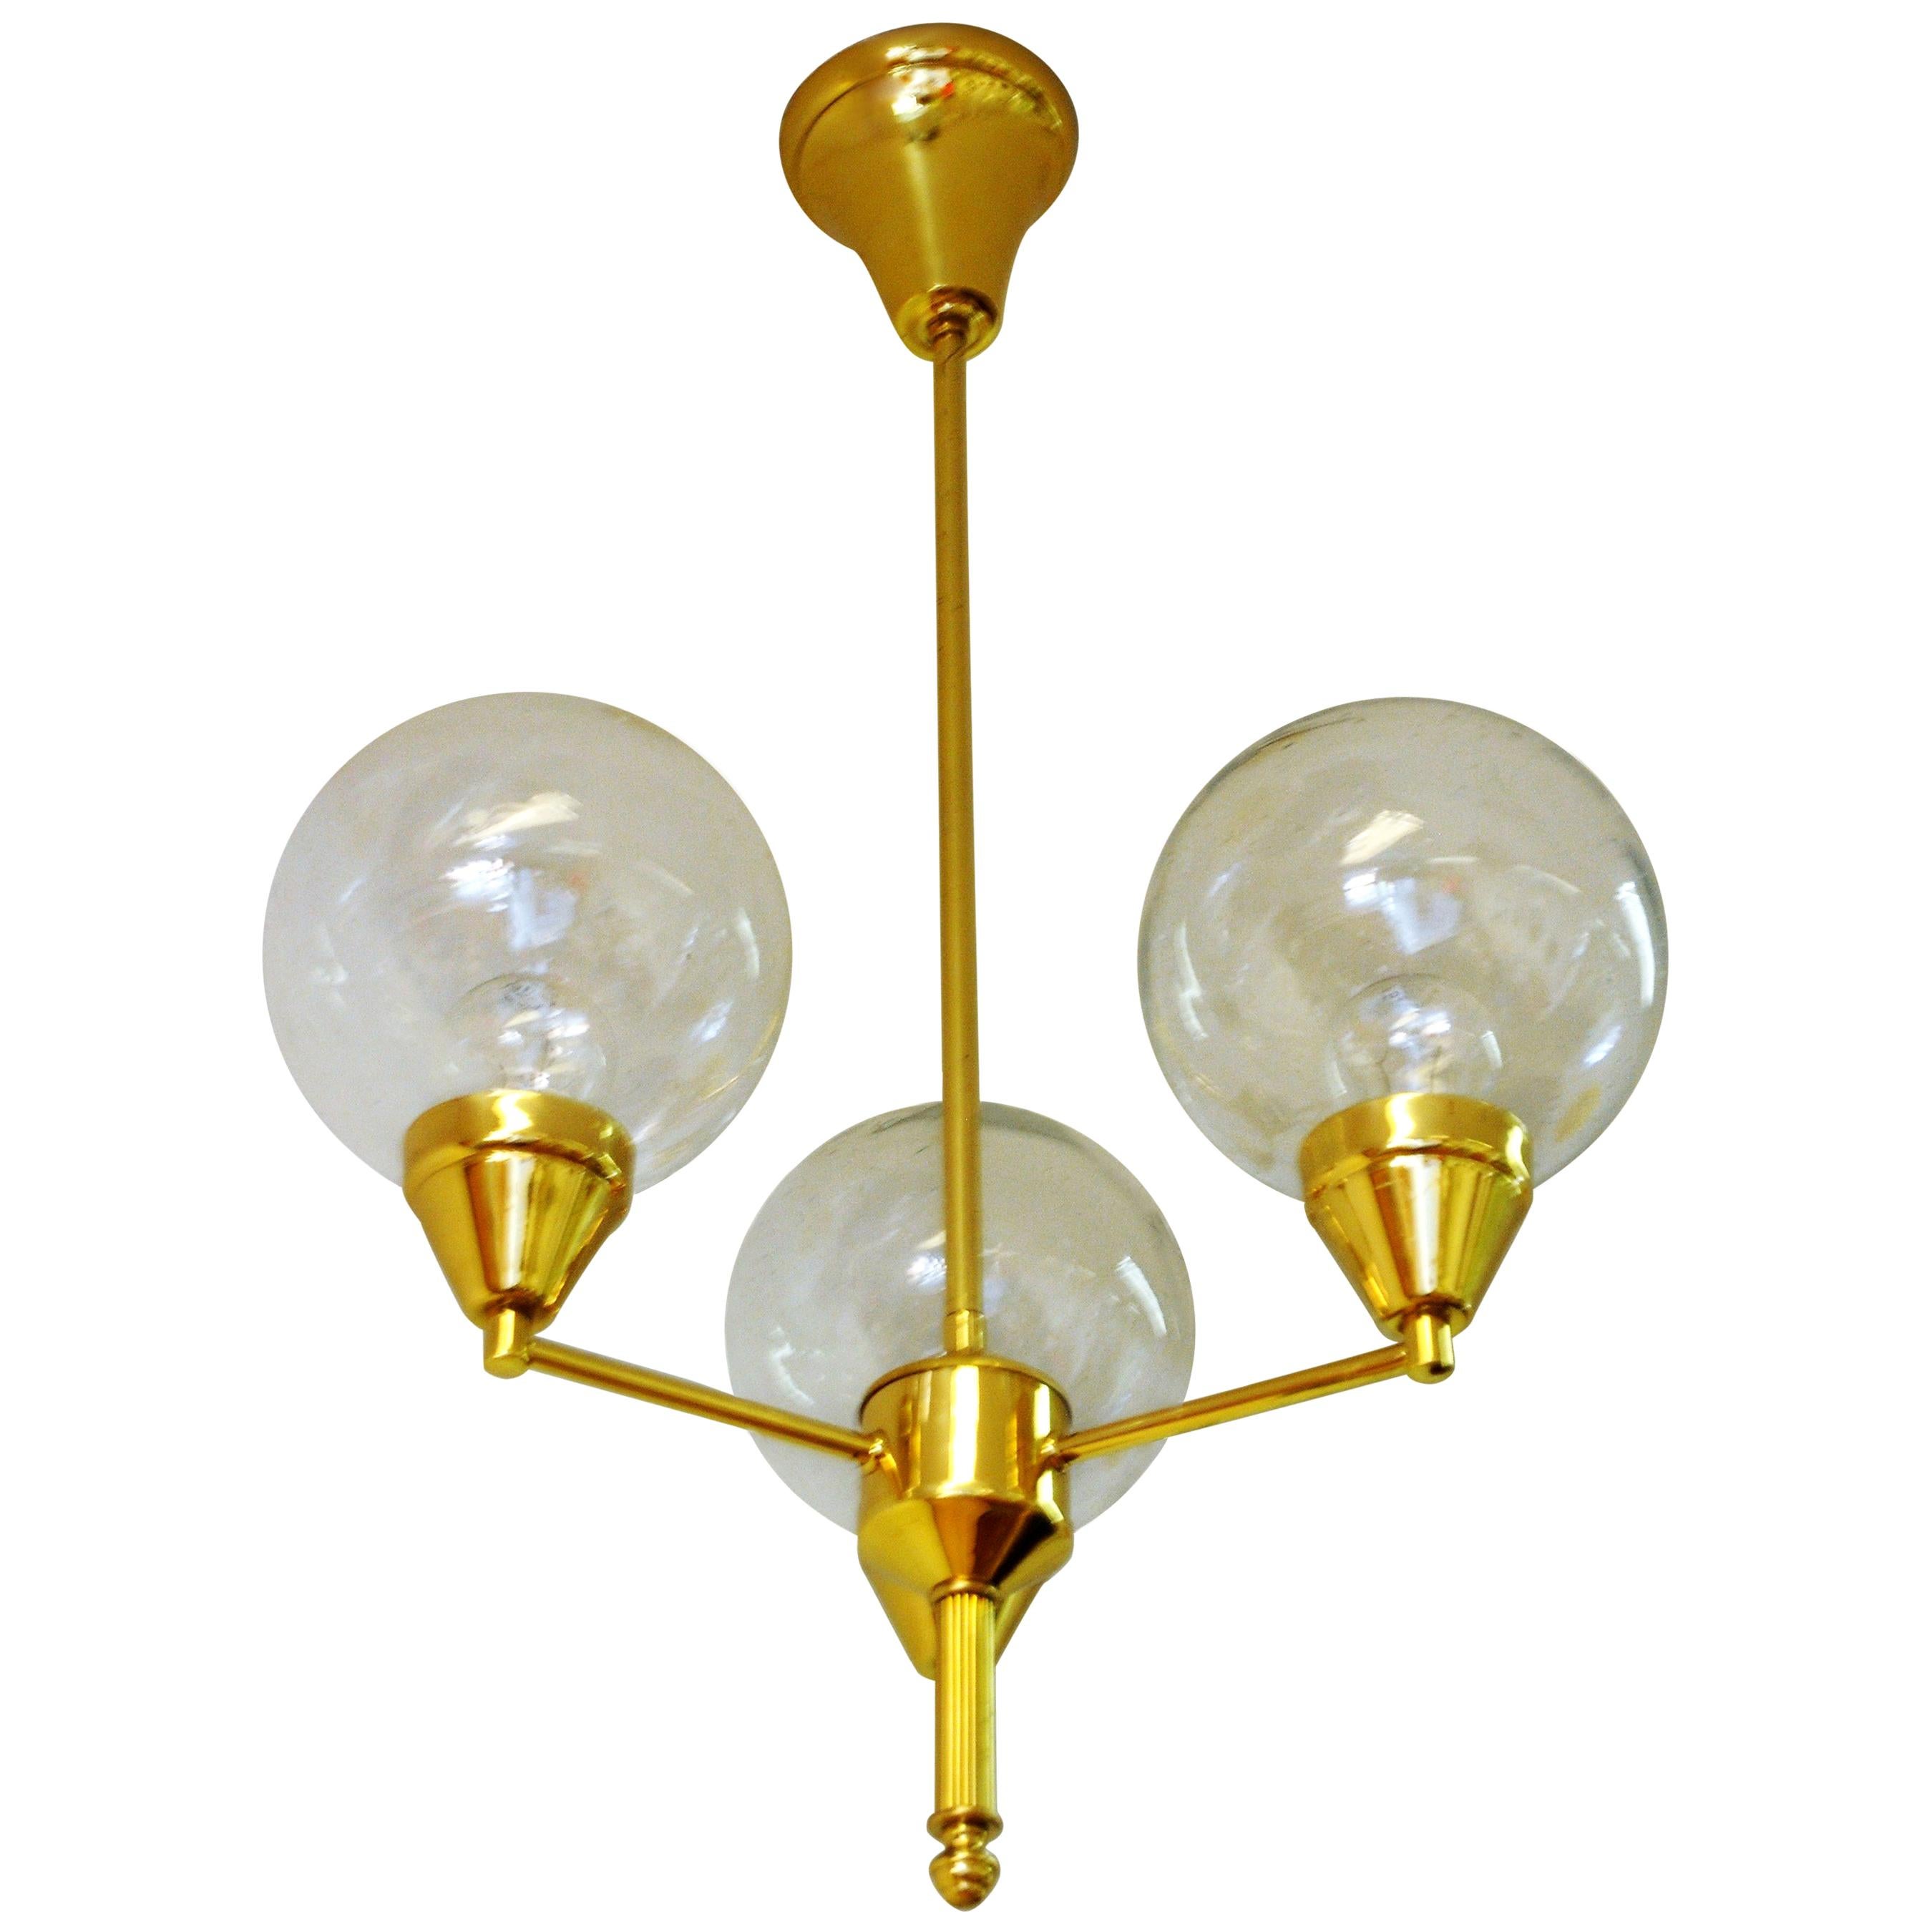 Midcentury Brass Ceiling Lamp with Three Clear Glass Domes 1960s, Sweden